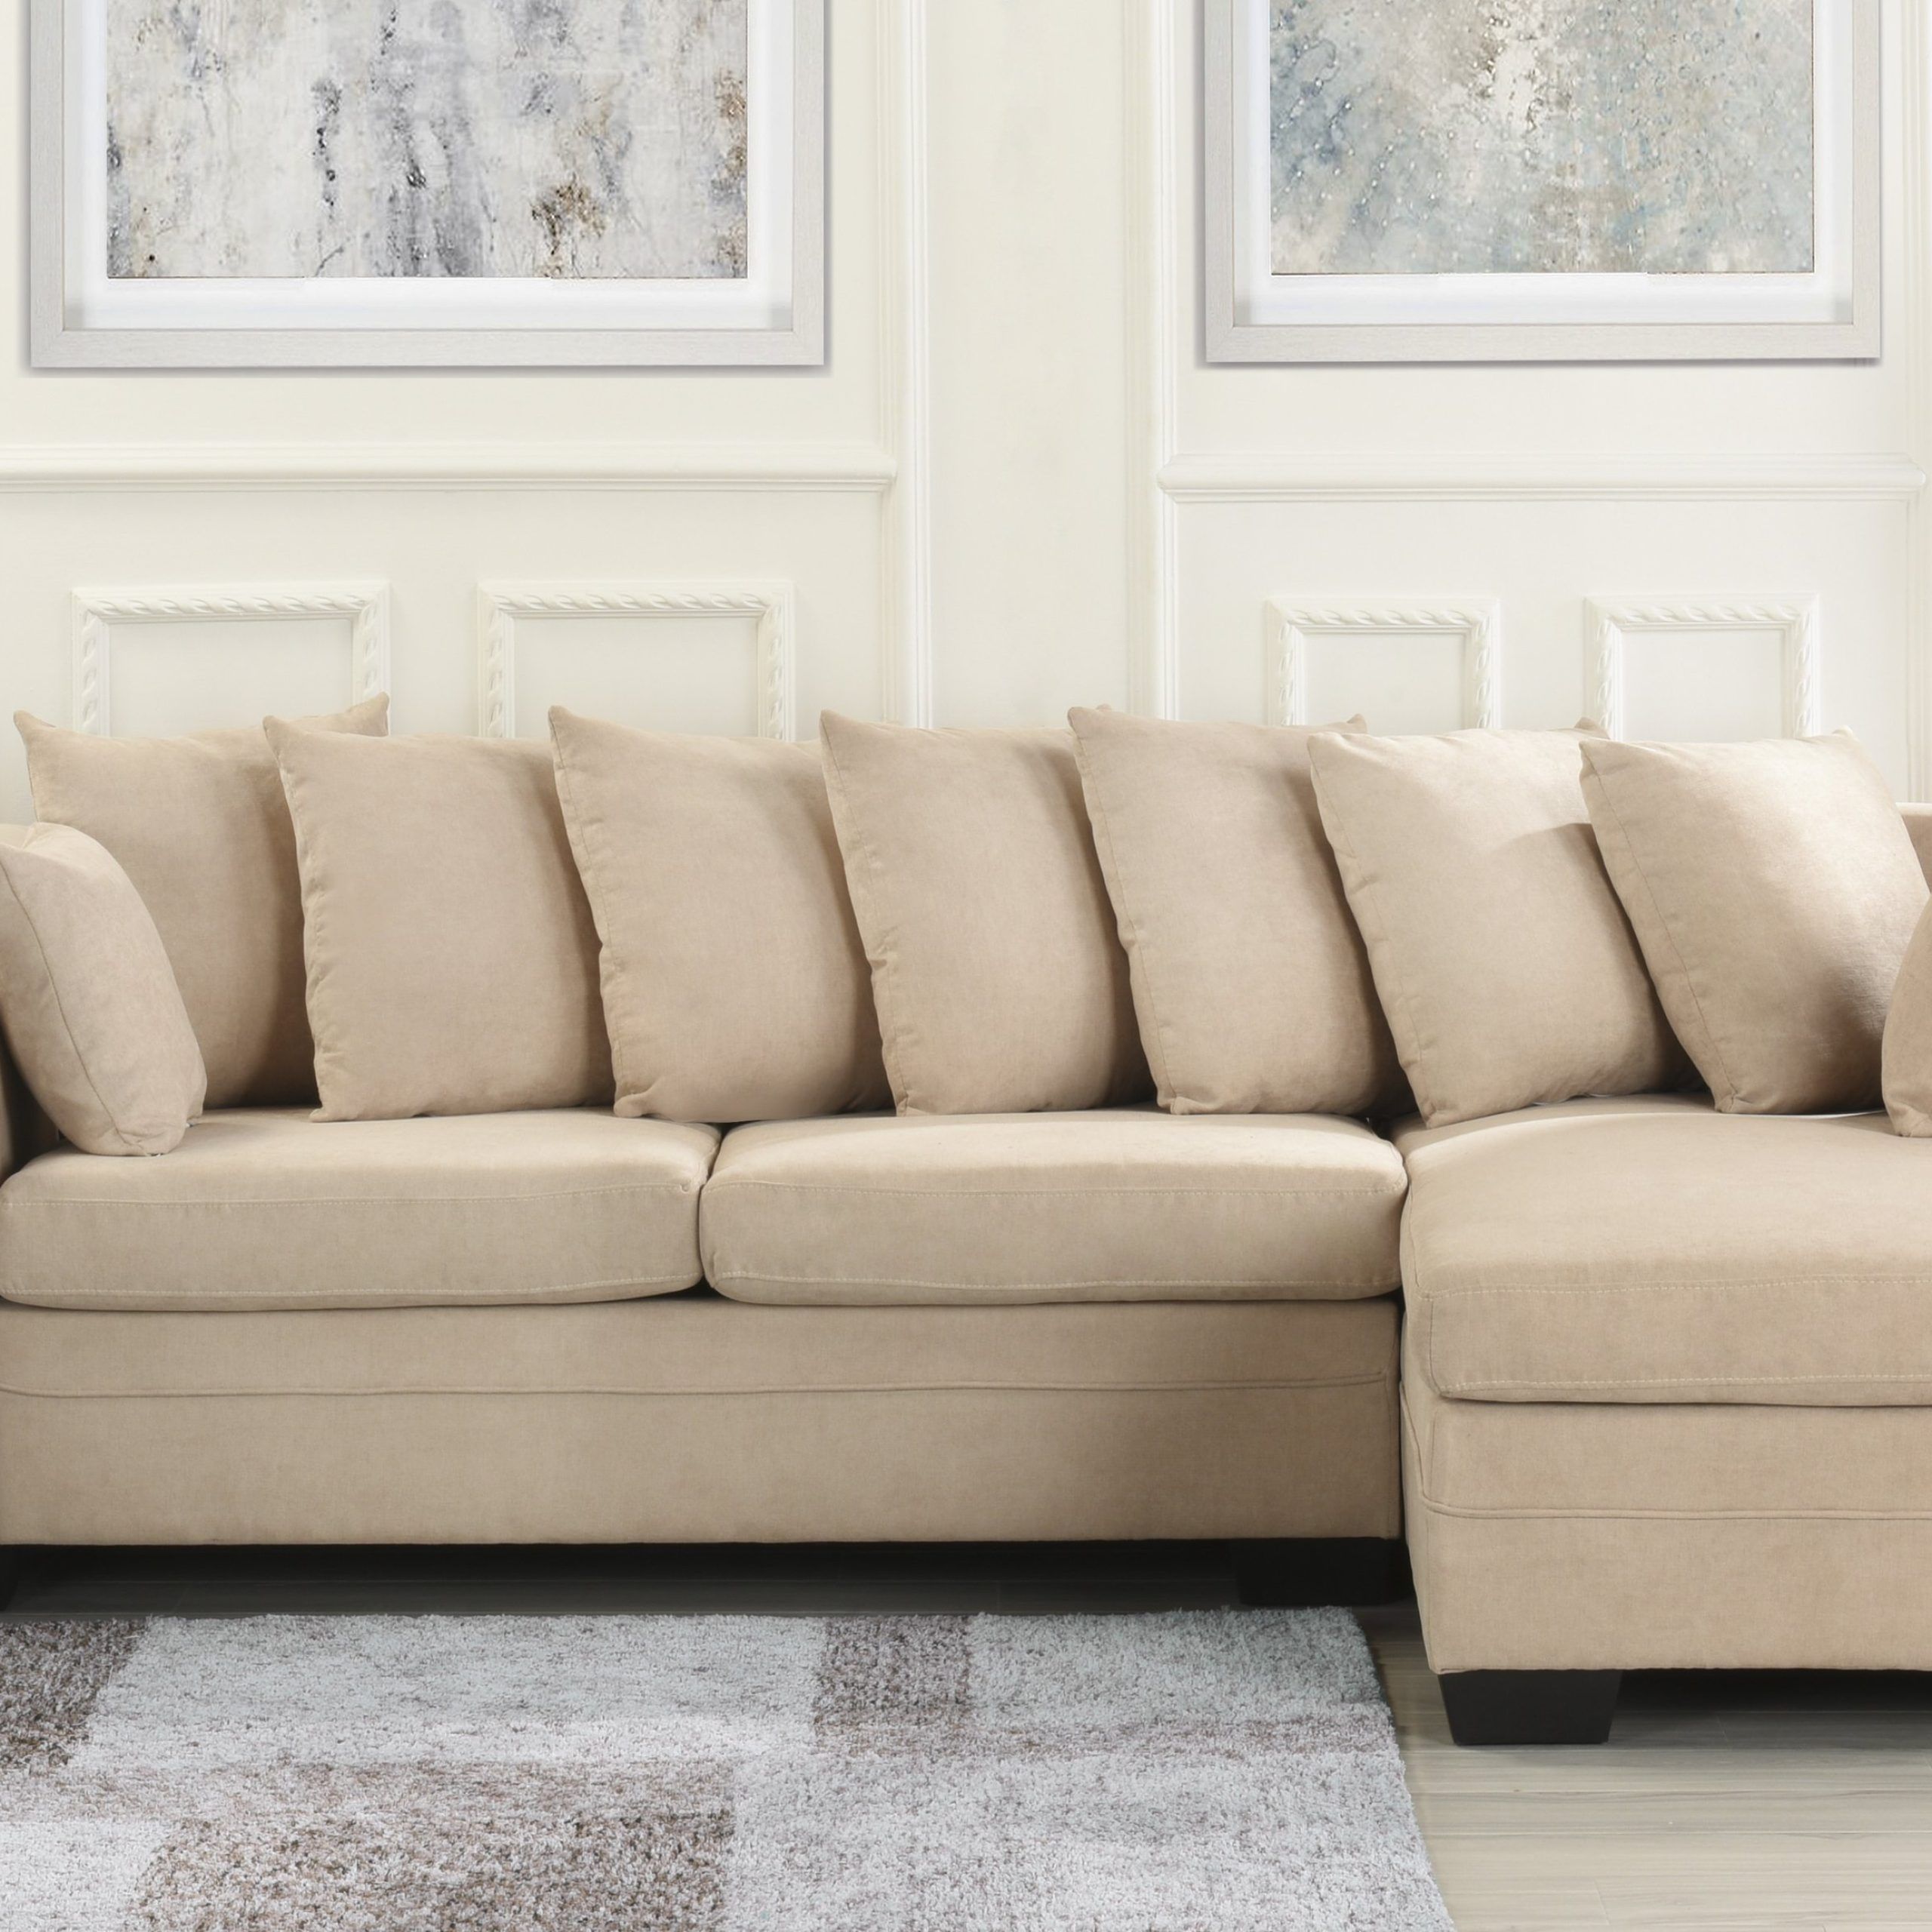 Large Brush Microfiber Sectional Sofa, L Shape Couch Extra Wide Chaise For Sofas In Beige (View 18 of 20)